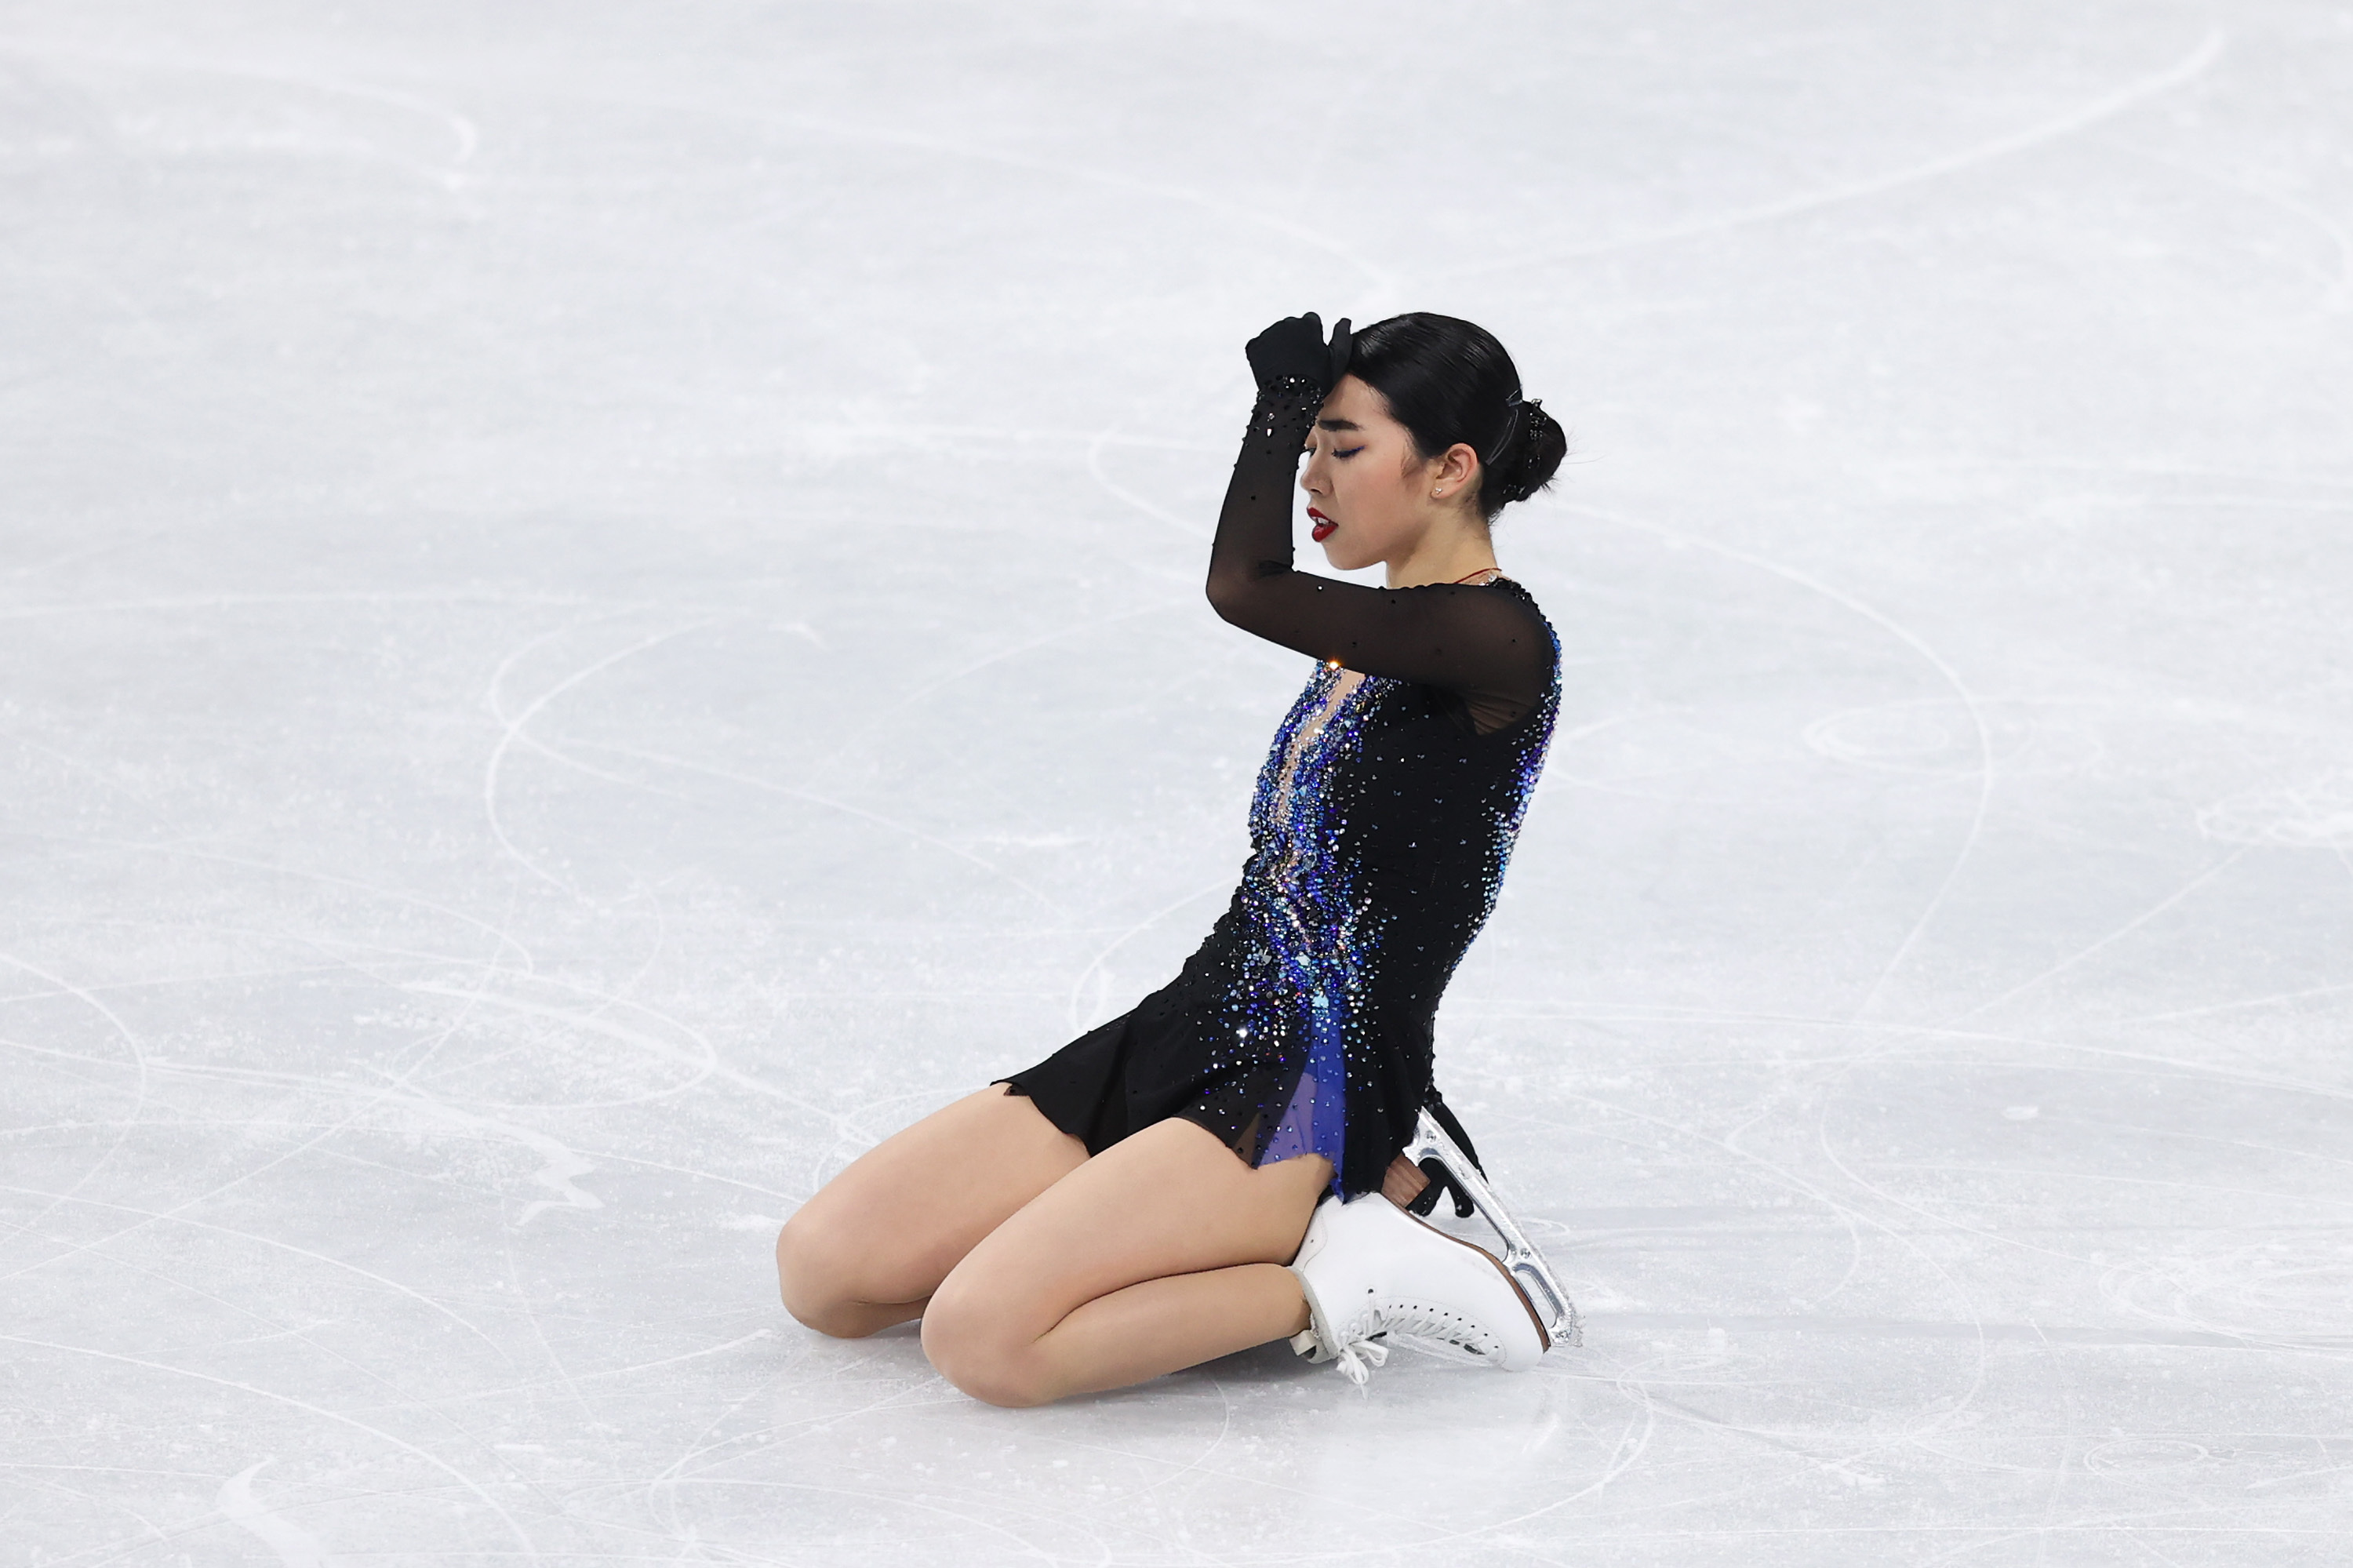 The 12 Figure Skaters to Watch Out for at the Olympics